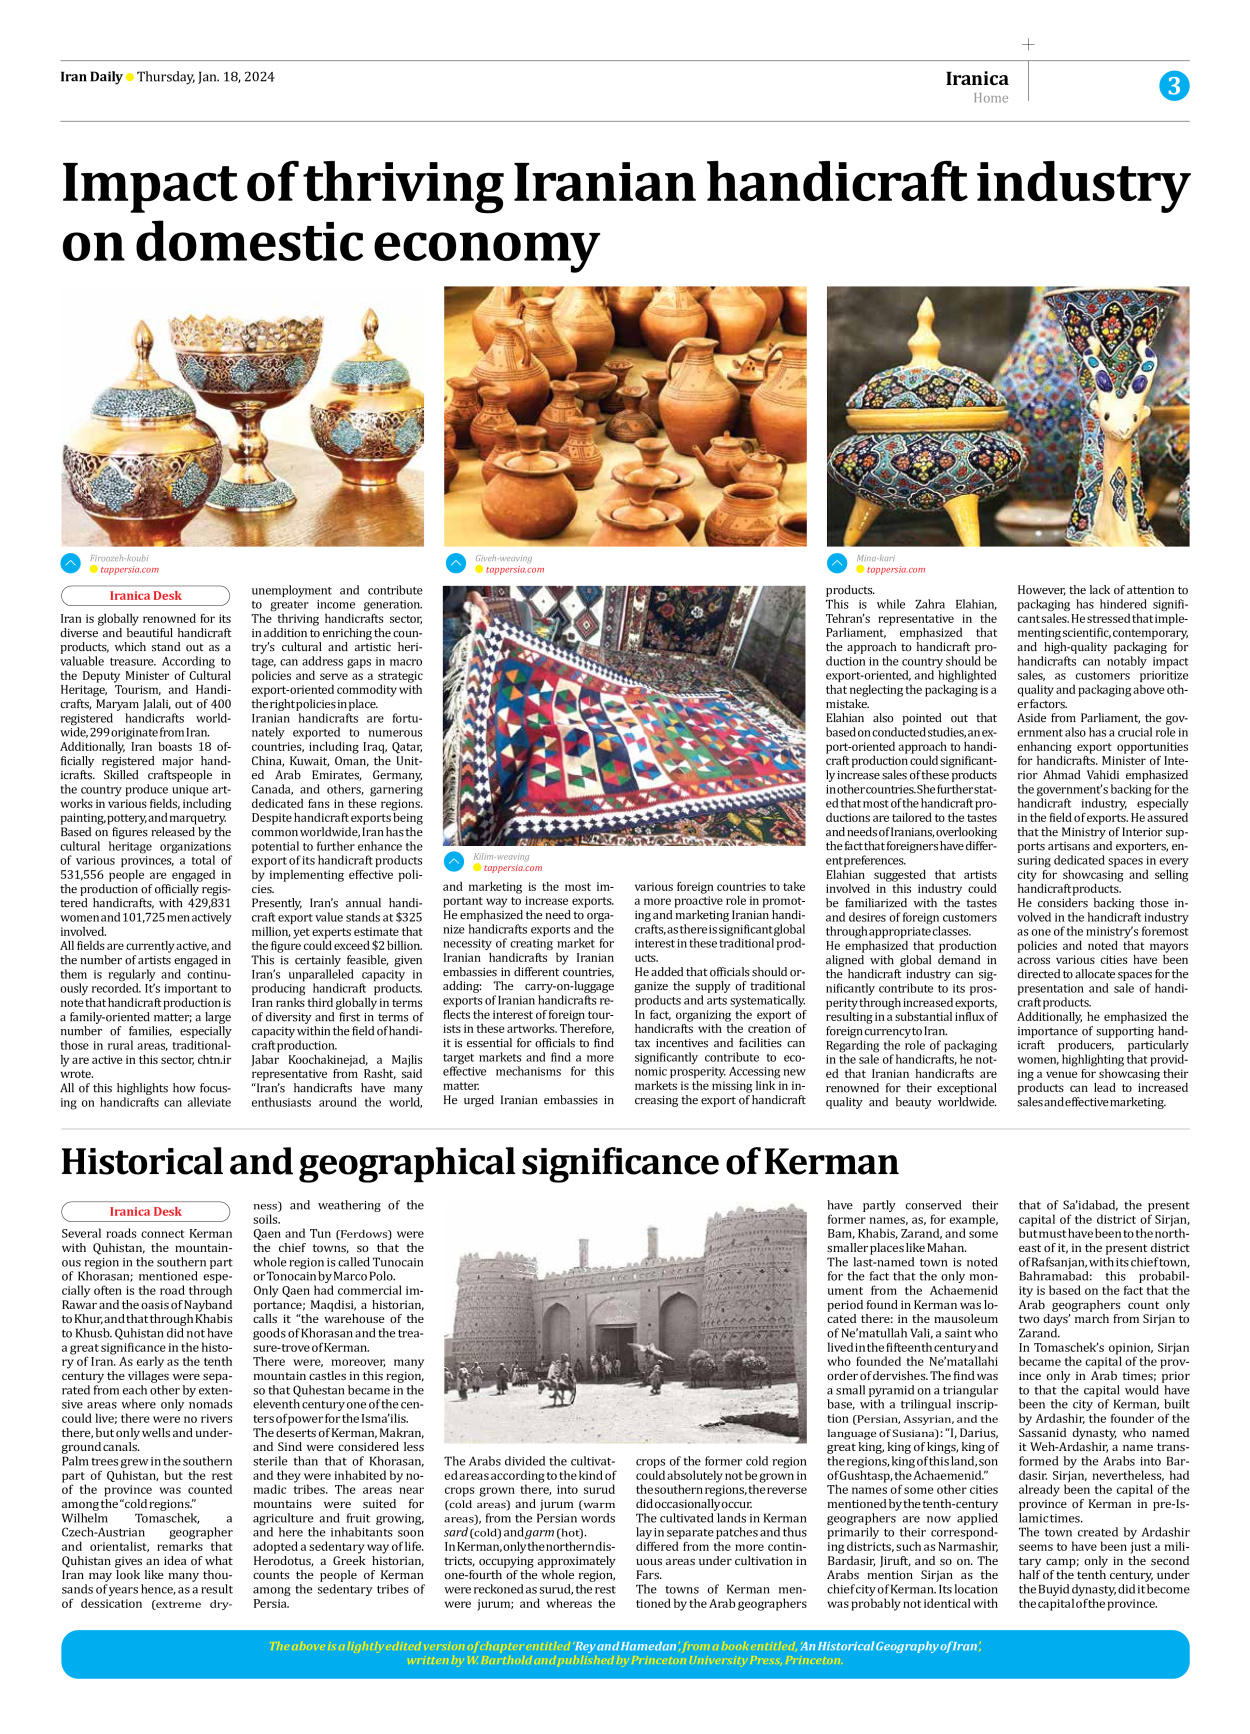 Iran Daily - Number Seven Thousand Four Hundred and Eighty Eight - 18 January 2024 - Page 3